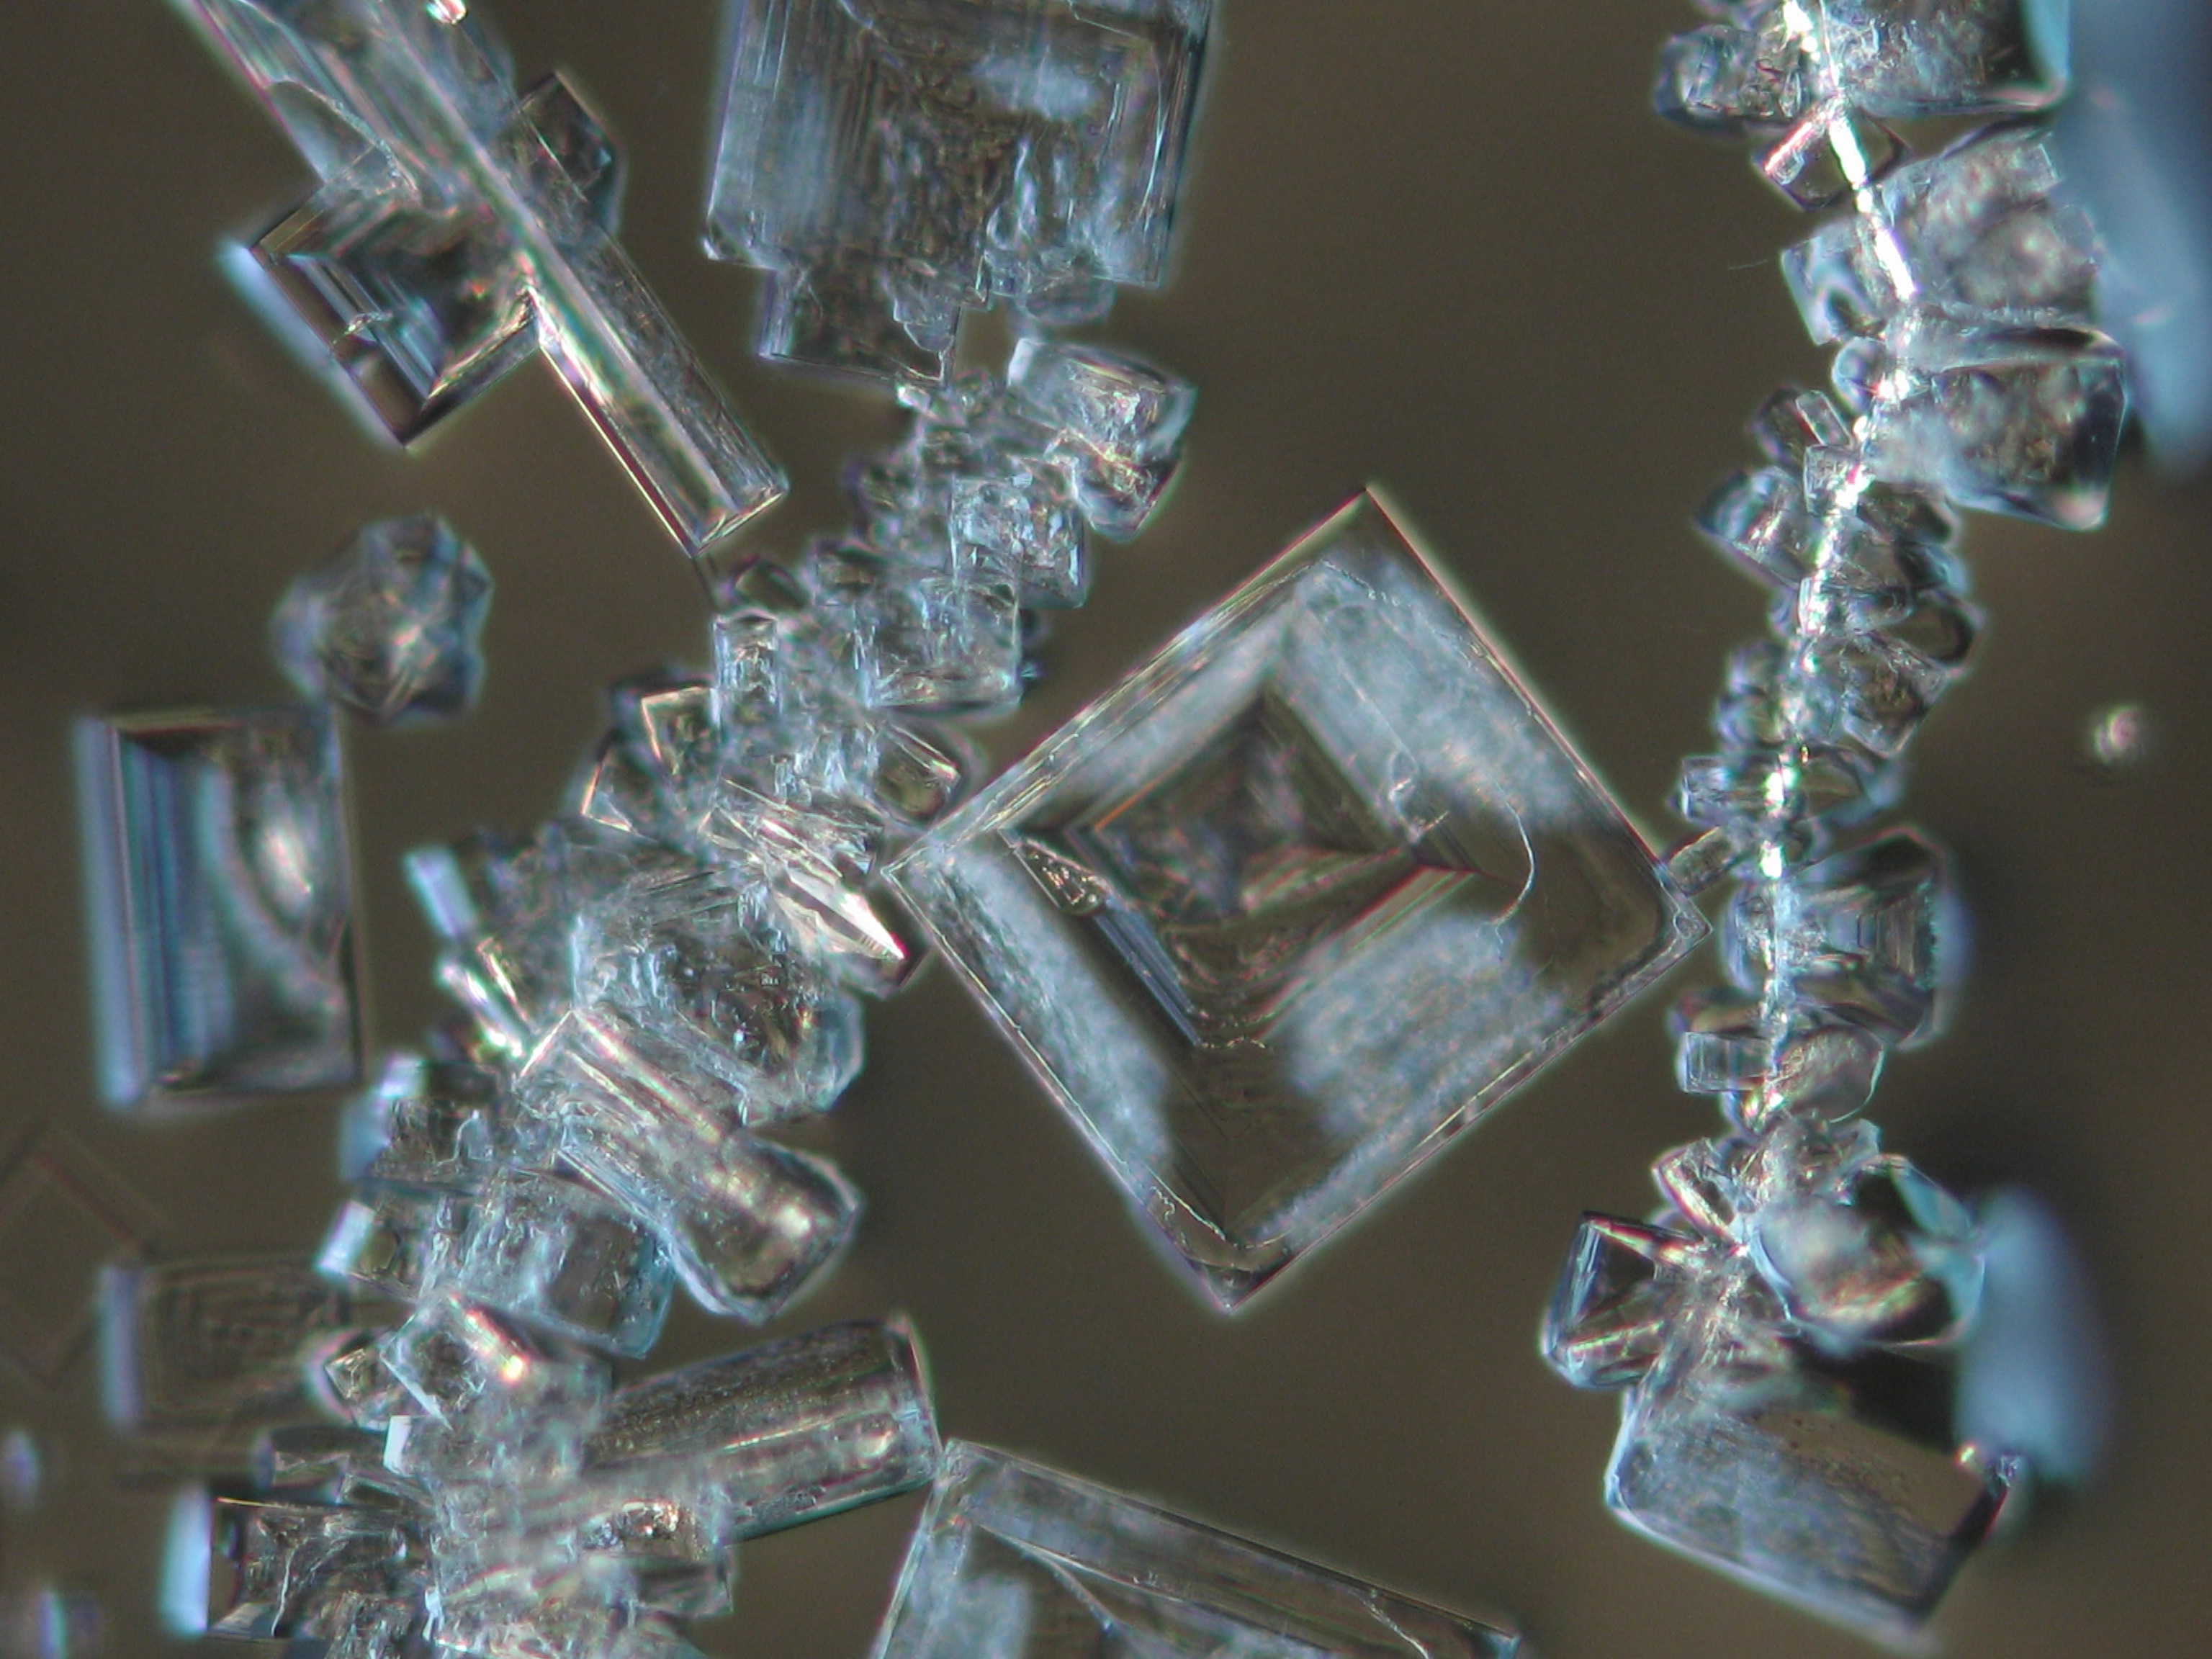 NaCl crystals on microscope slides